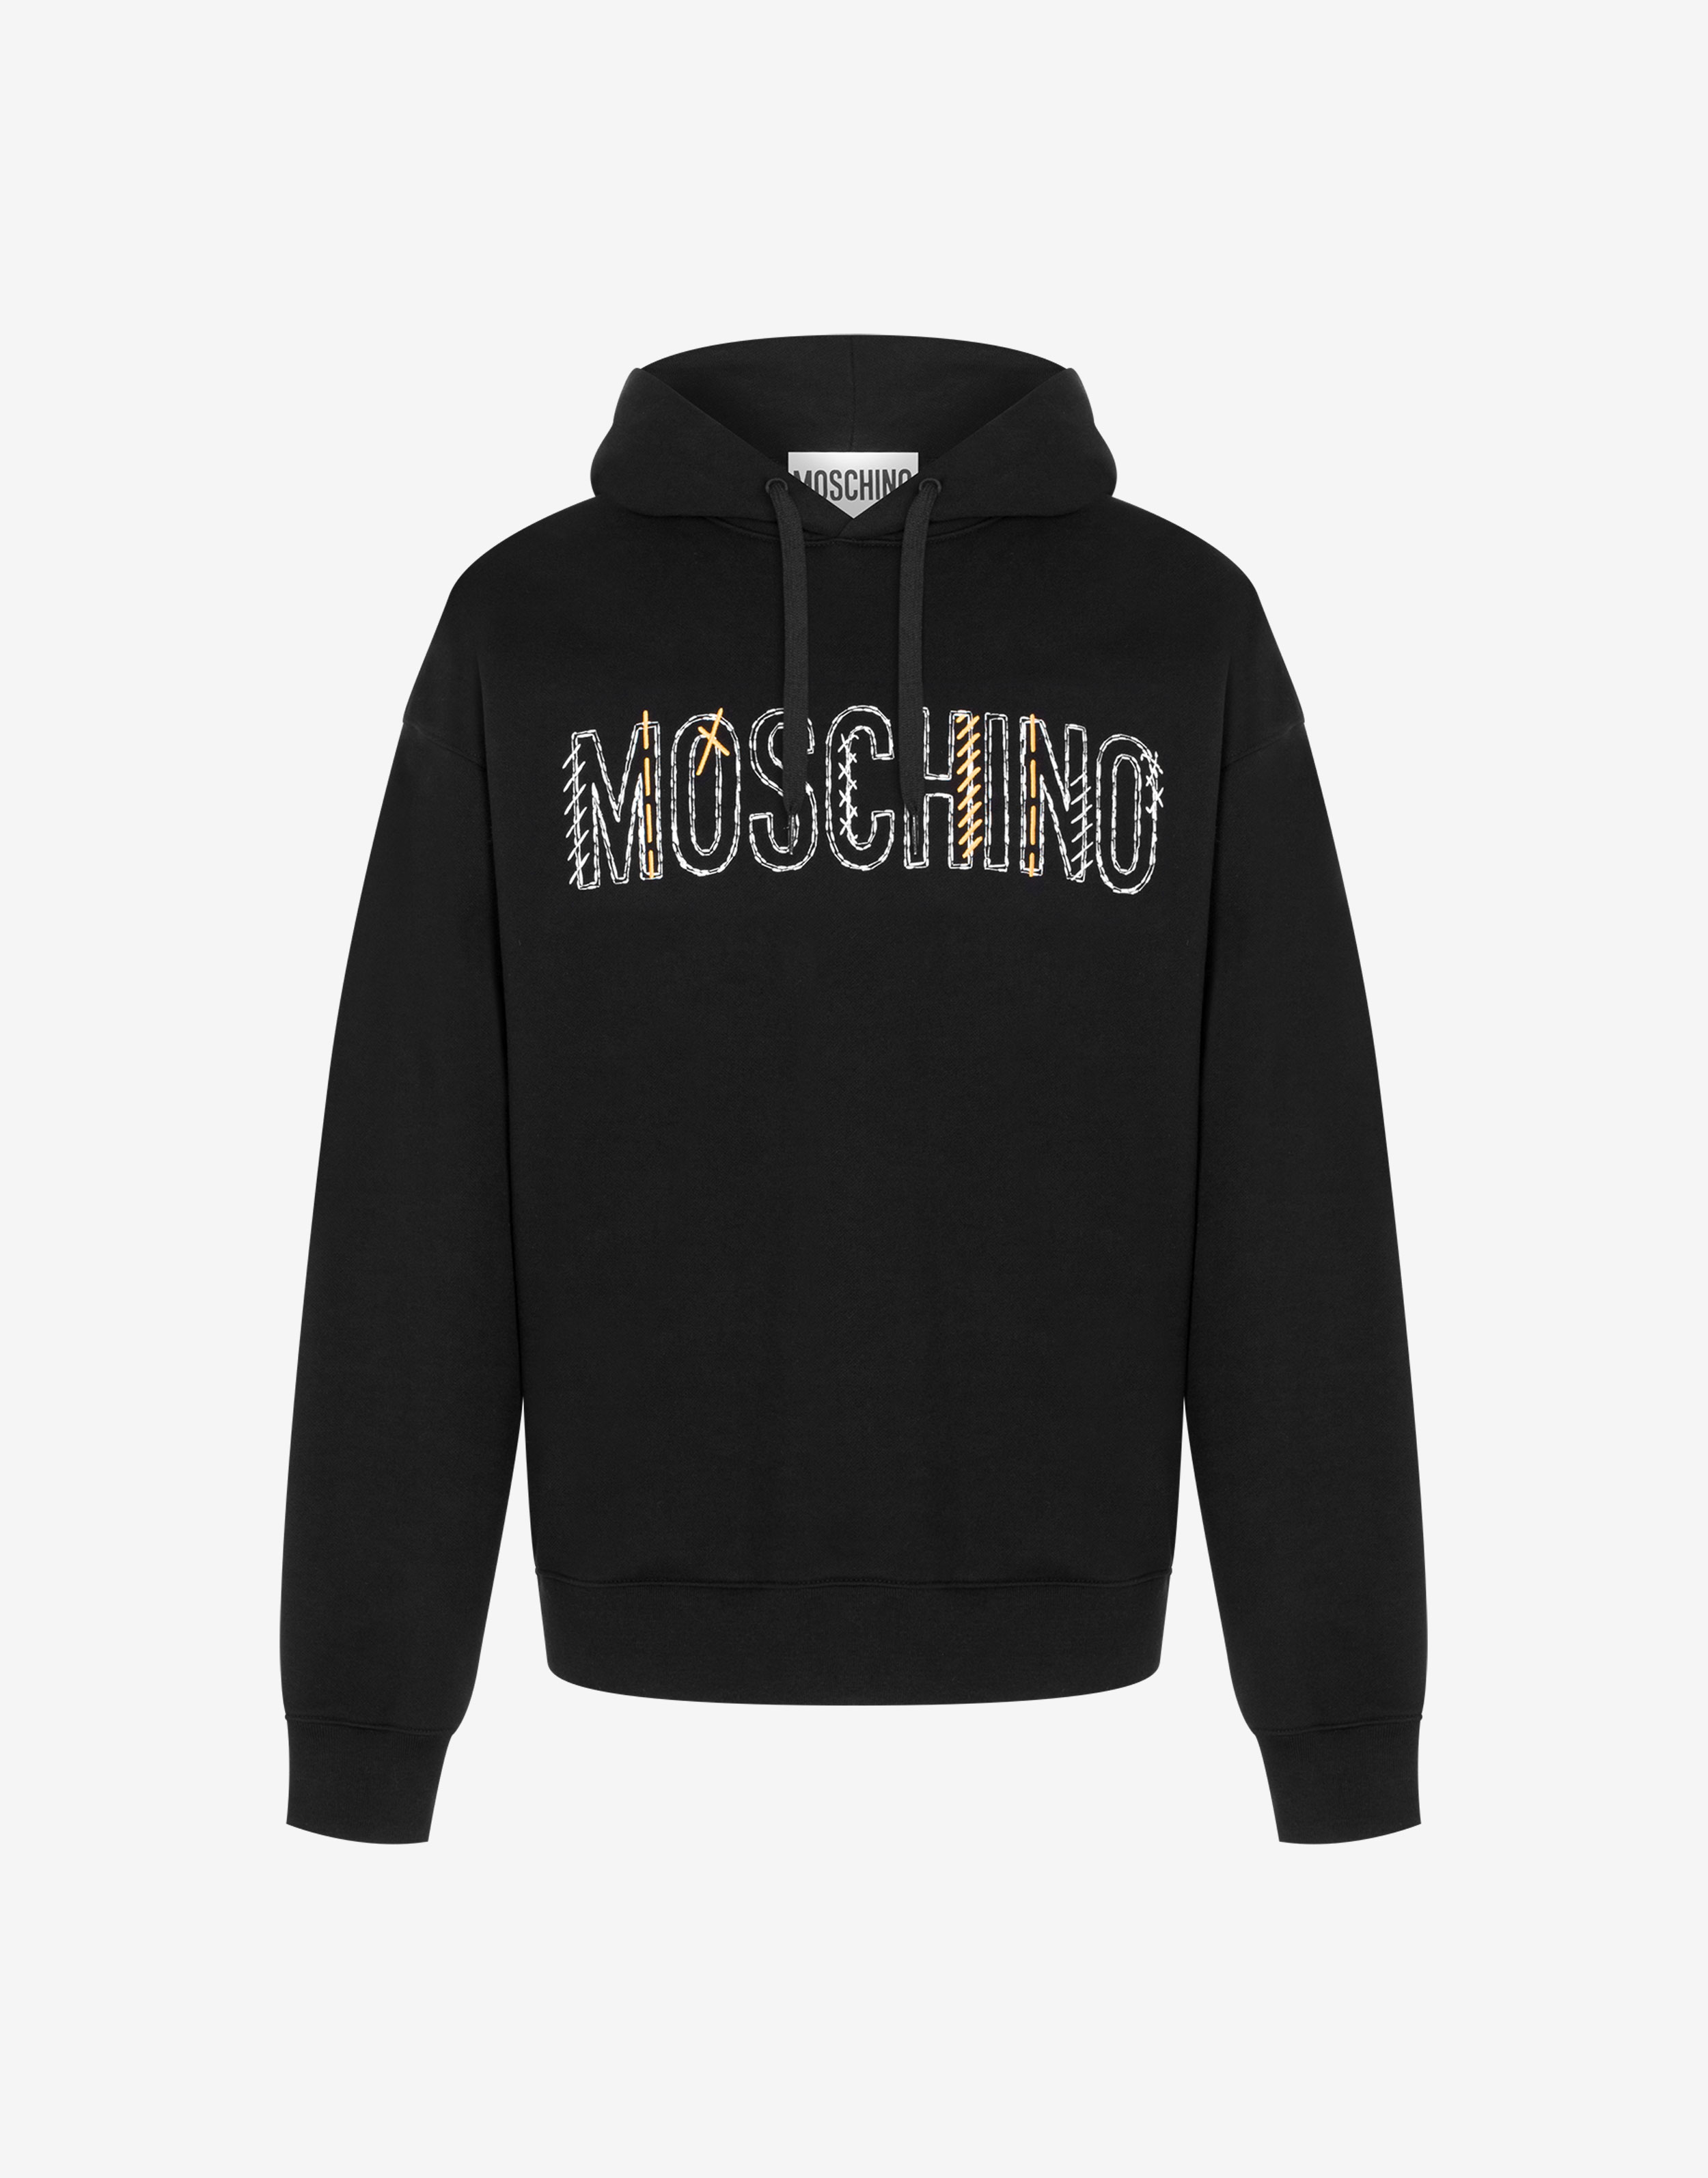 Moschino Sweatshirts for Sale - Official Store